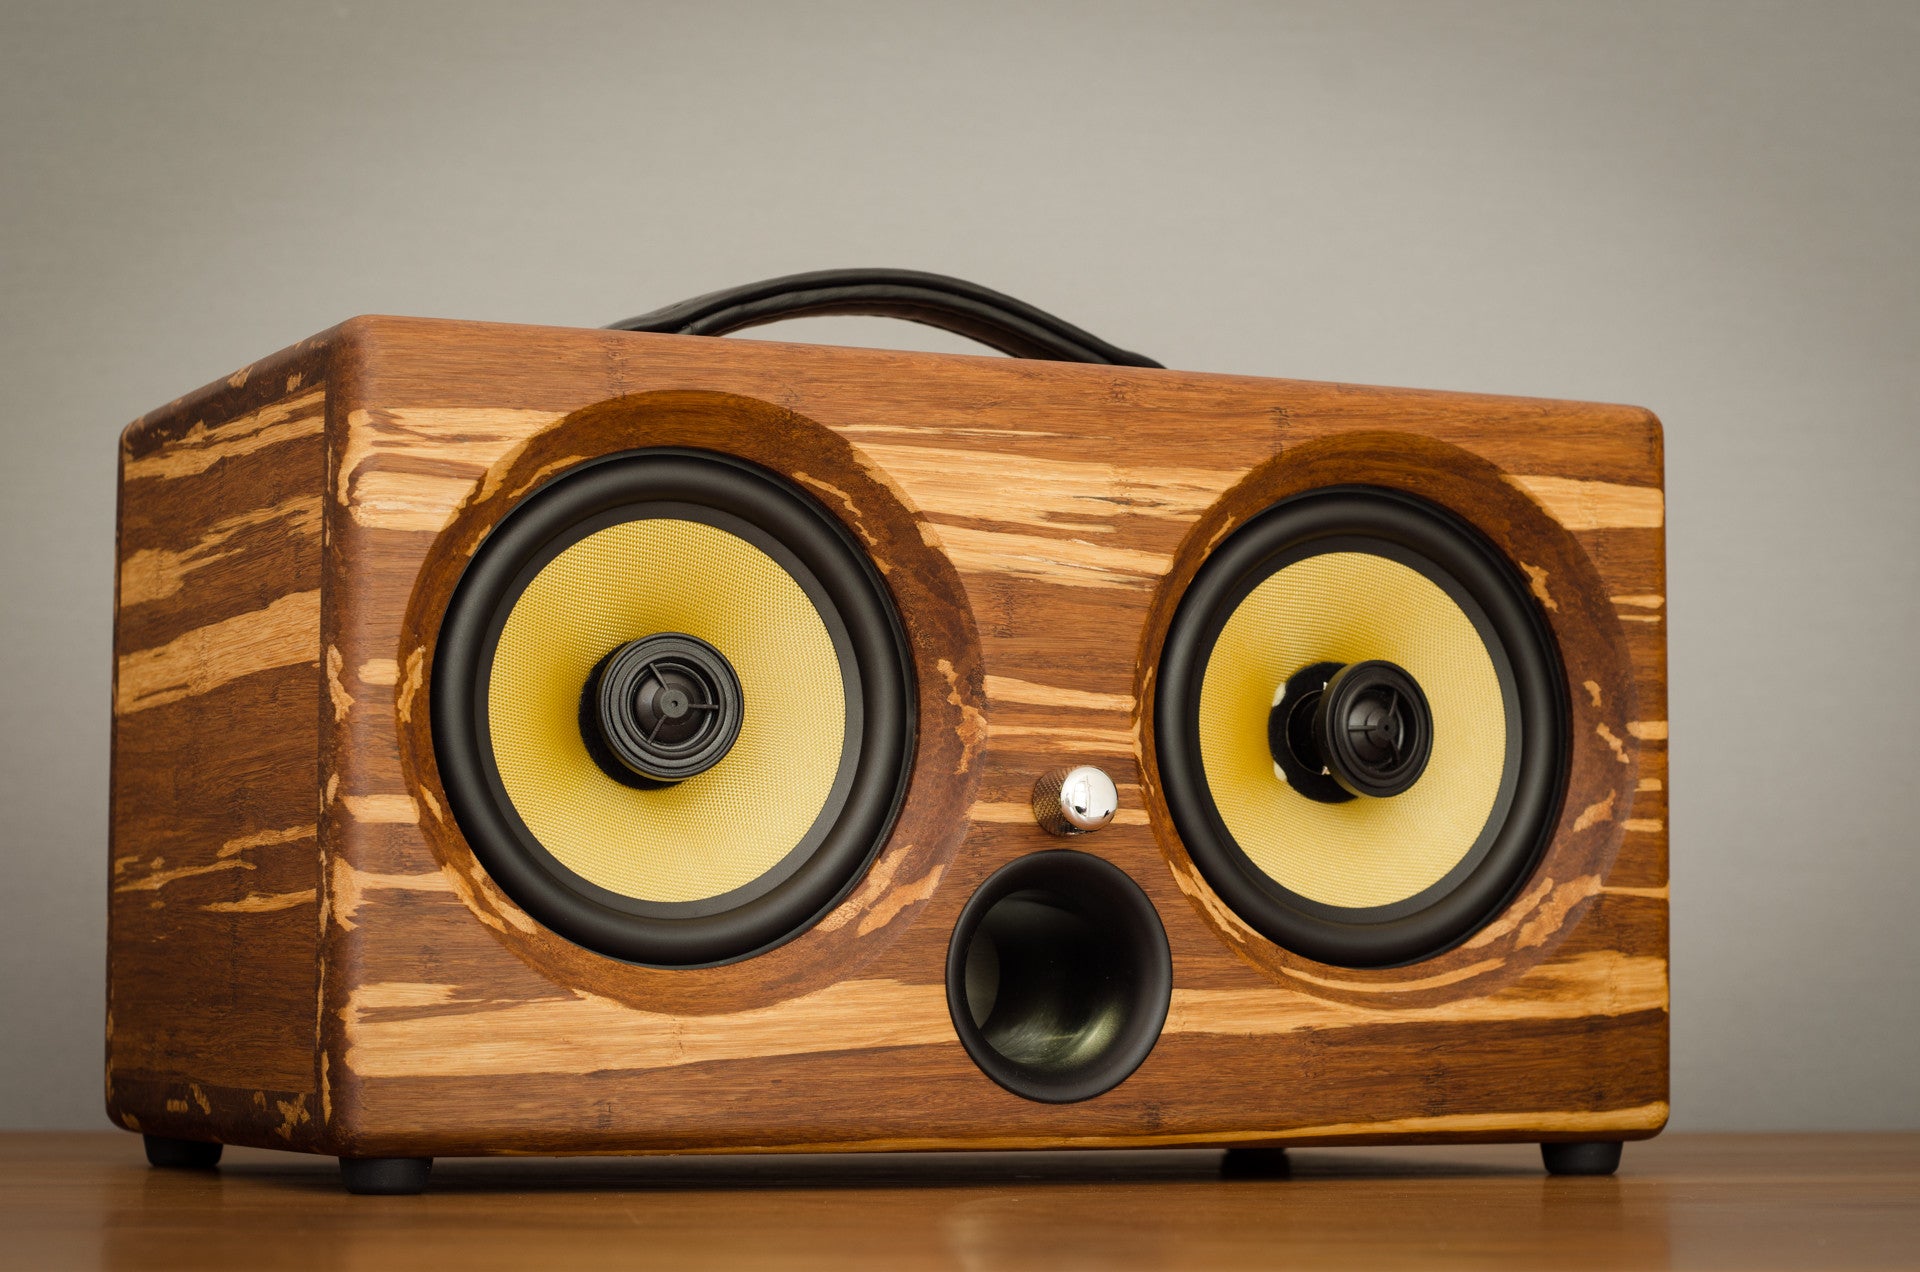 http://cdn.shopify.com/s/files/1/0221/4370/products/Best-airplay-speaker-2015-review-wifi-bluetooth-speakers-aptx-new-latest-ultimate-coolest-boombox-available-wooden-vintage-audiophile-tk2050-tripath-amplifier-guitar-HD-sound-music-high-resolution-3.jpg?v=1436260930